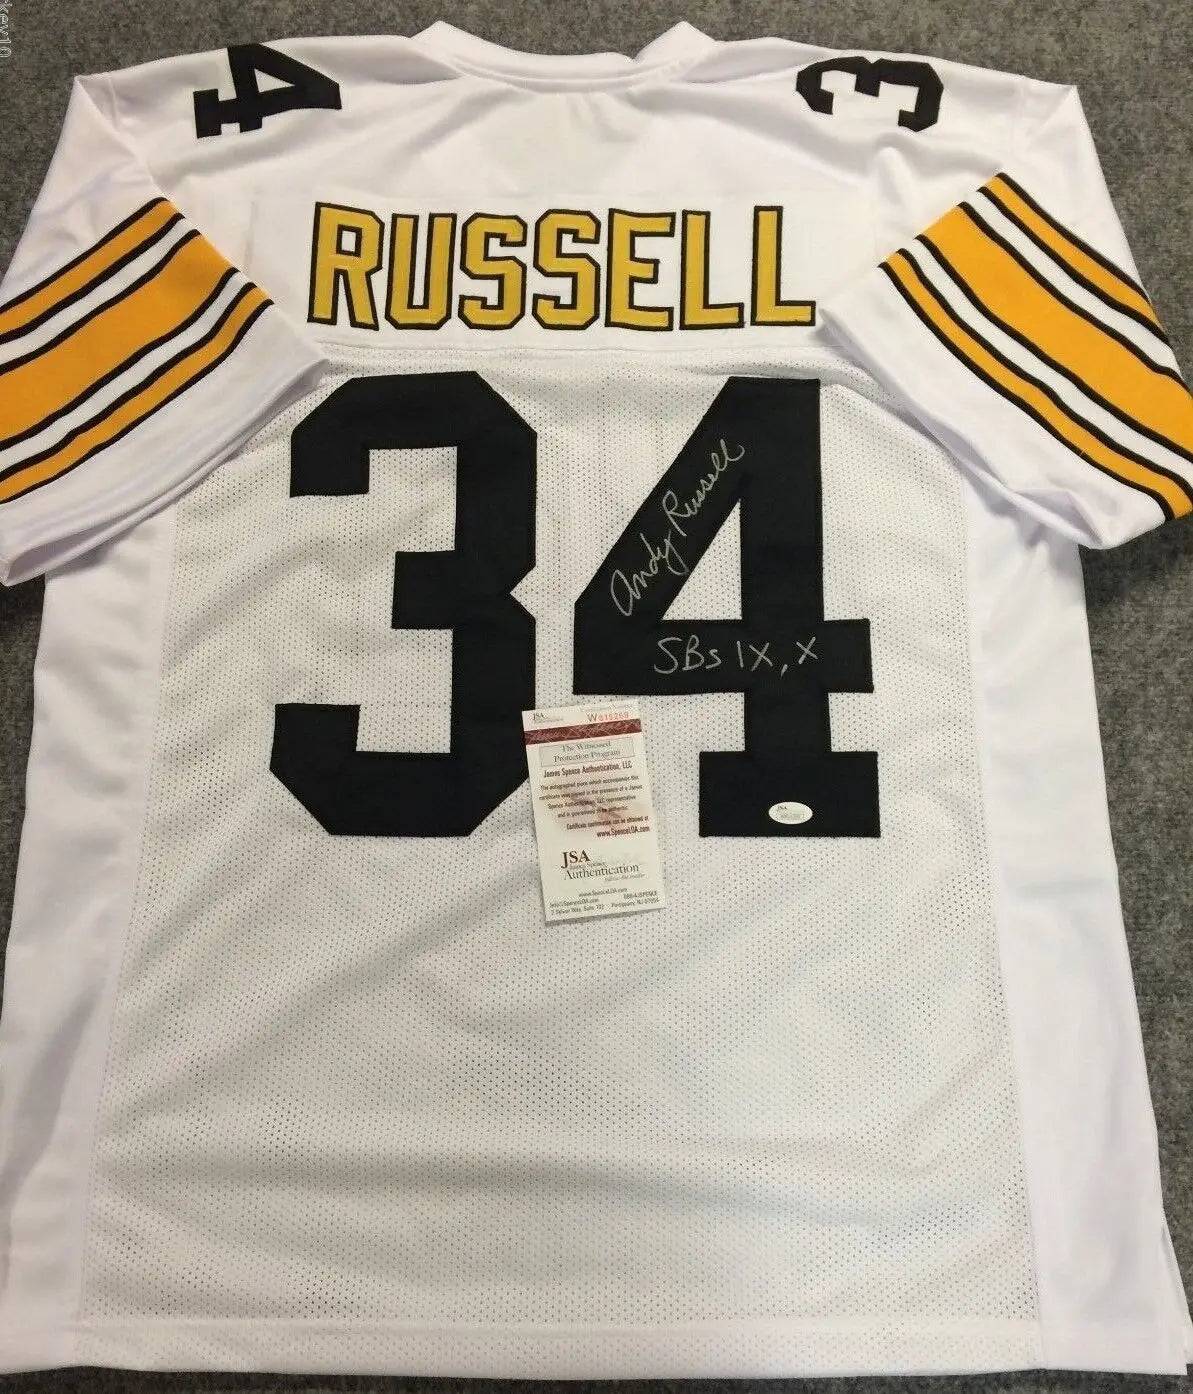 MVP Authentics Andy Russell Autographed Signed Incscribed  Pittsburgh Steelers Jersey Jsa Coa 108 sports jersey framing , jersey framing